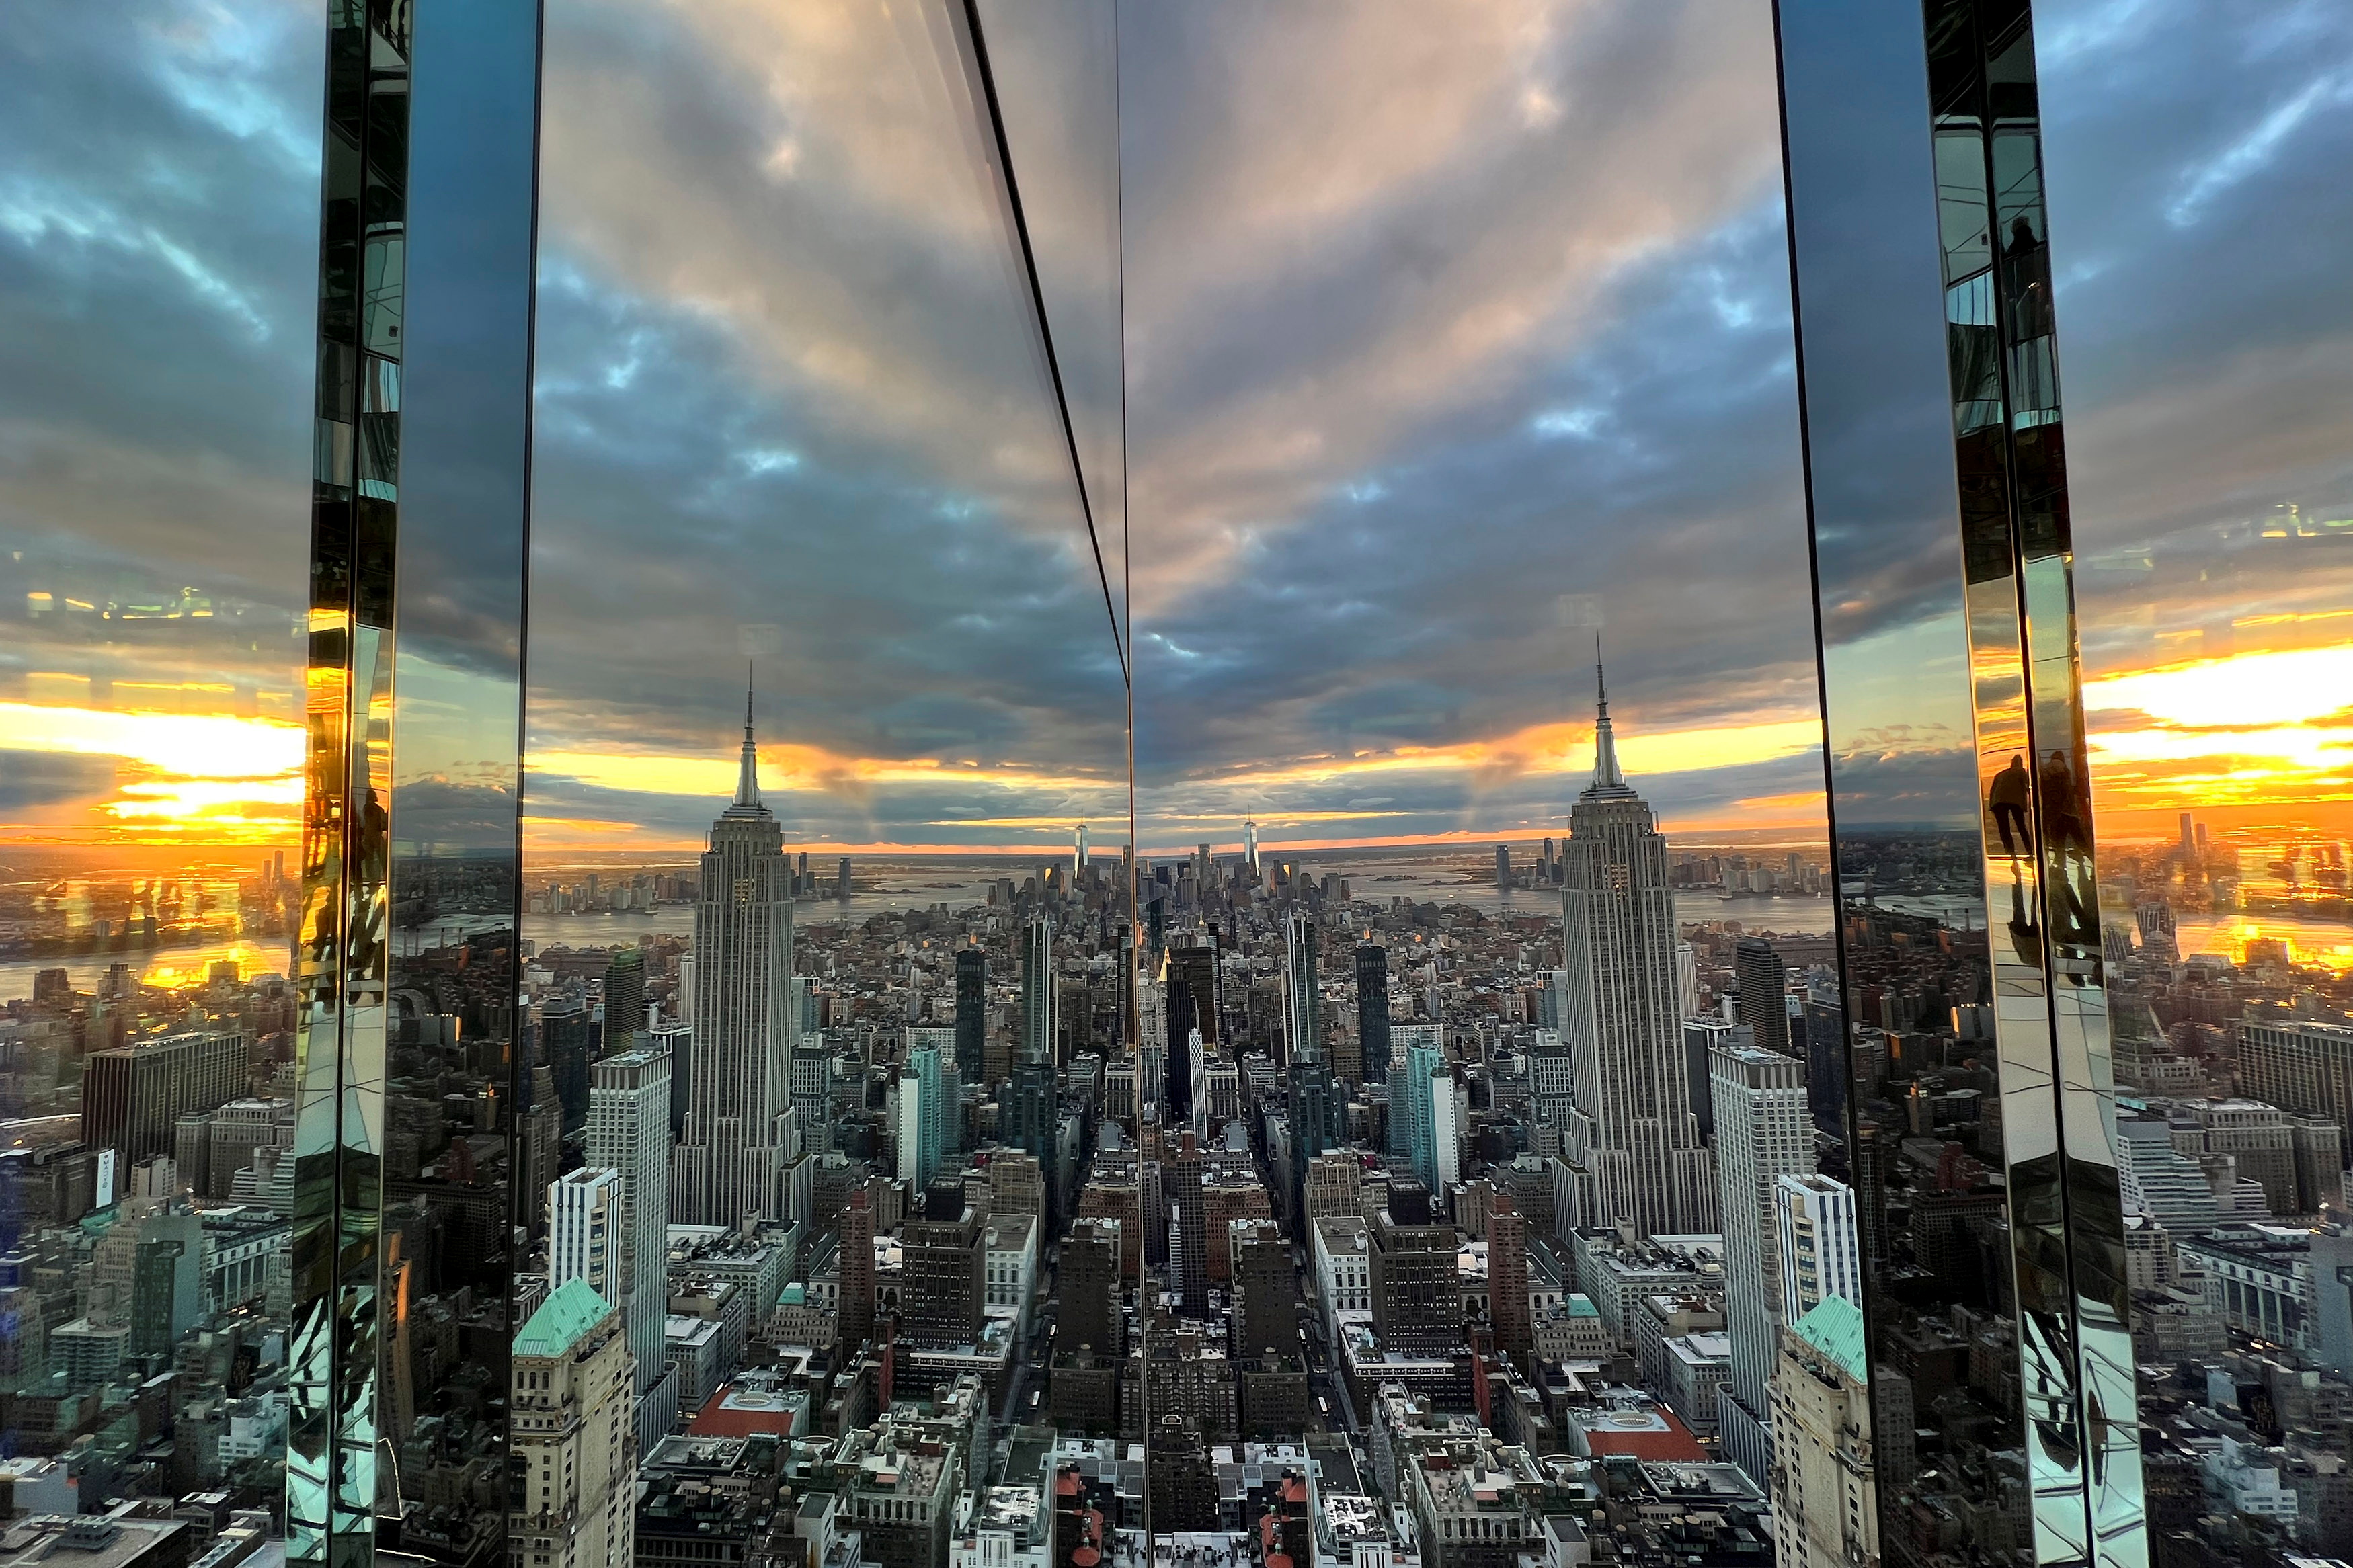 The Empire State Building and New York’s skyline are seen during the preview of SUMMIT One Vanderbilt observation deck in Midtown Manhattan, in New York City